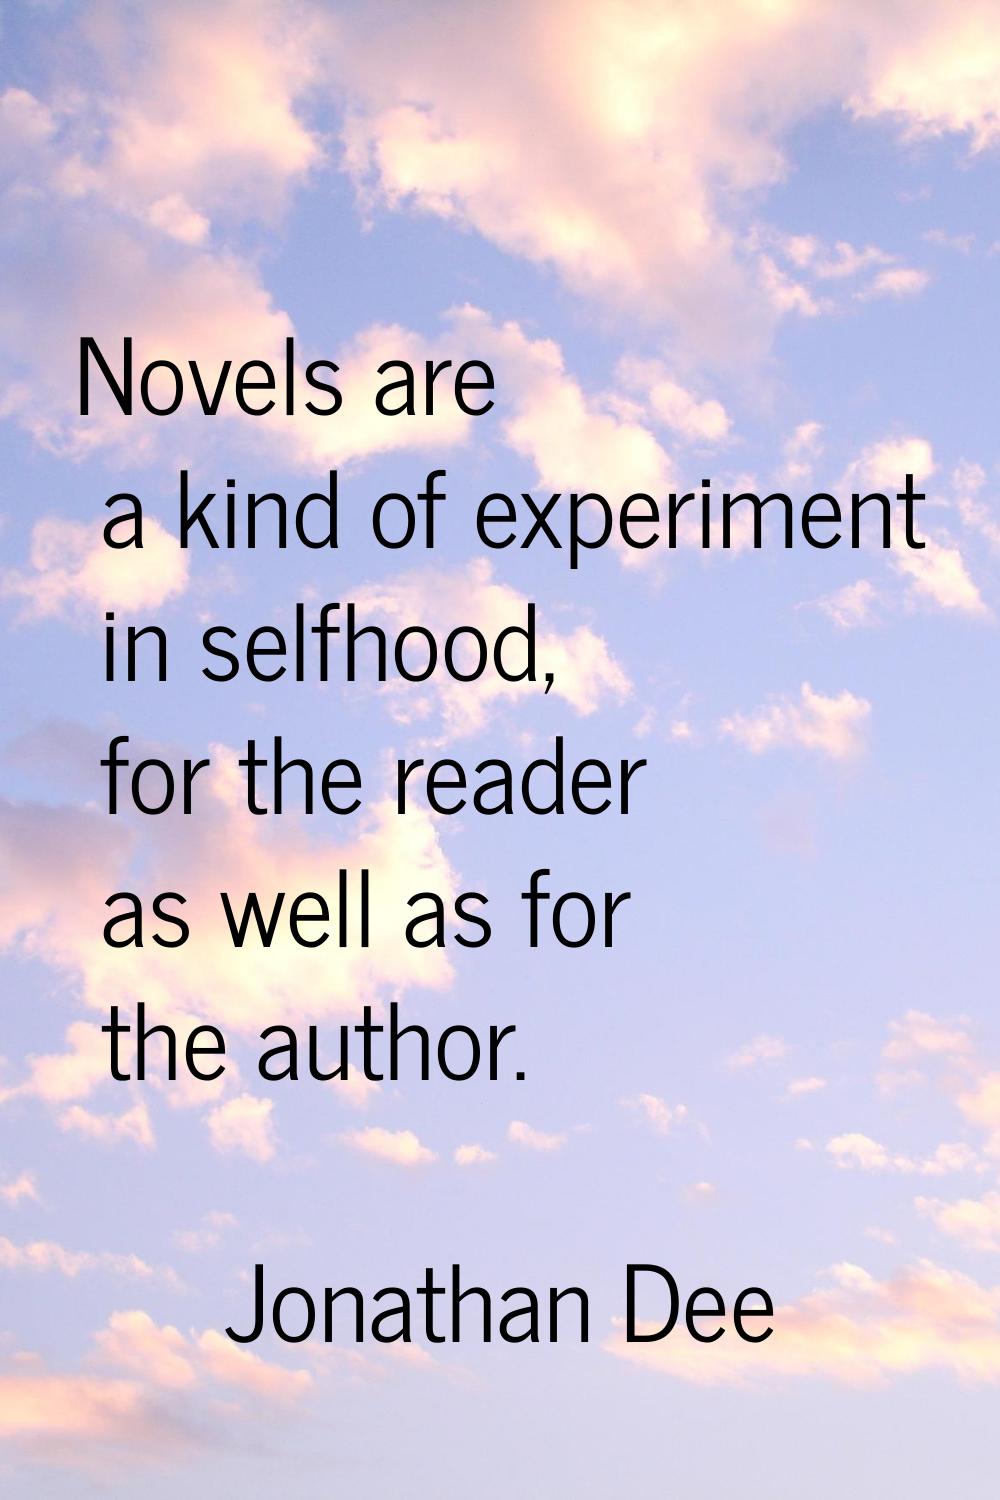 Novels are a kind of experiment in selfhood, for the reader as well as for the author.